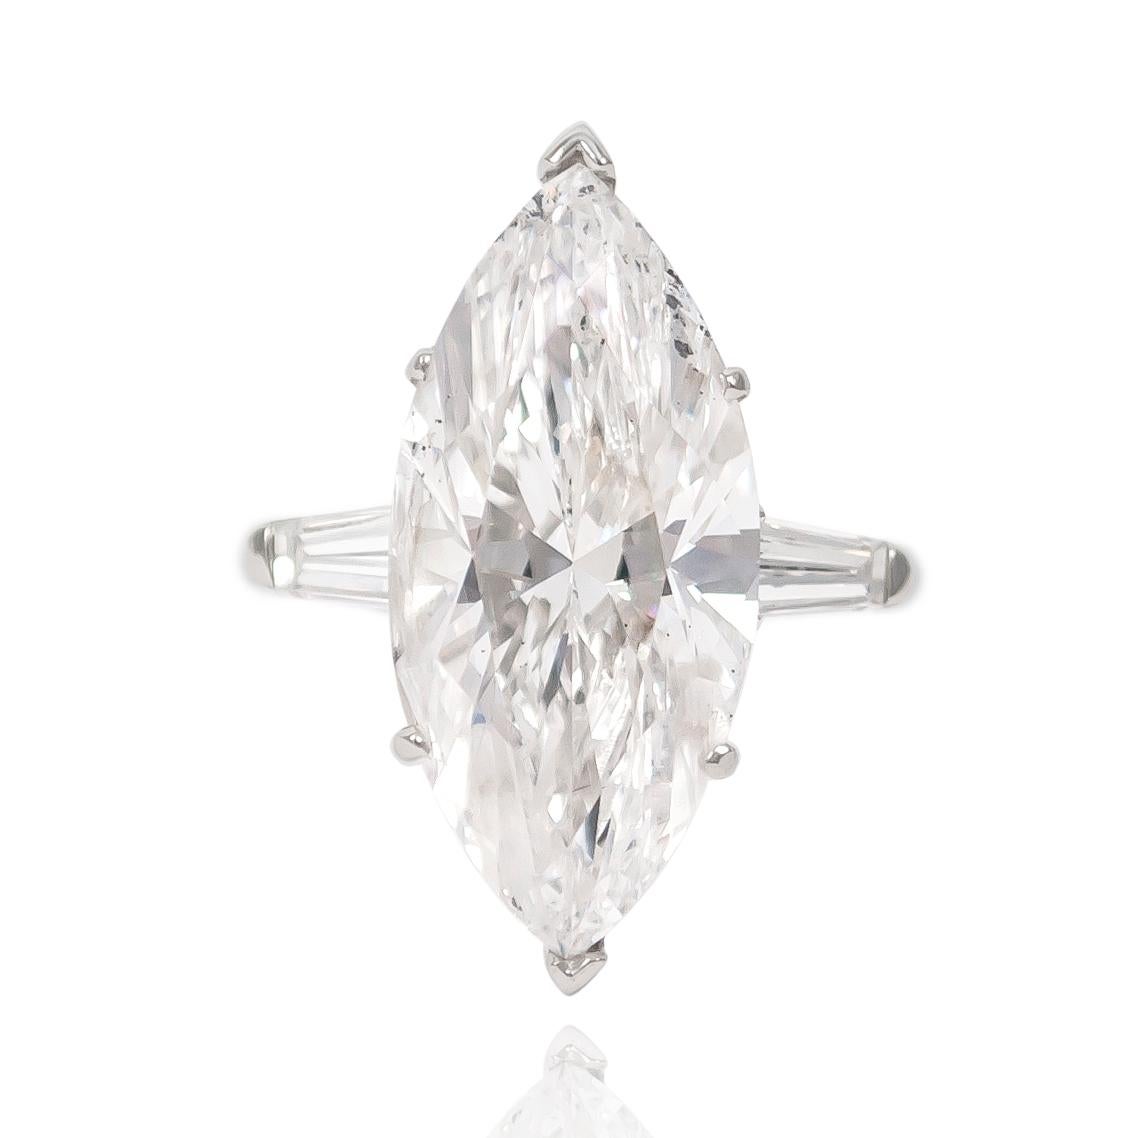 This incredible GIA certified 10.35 ct Marquise diamond is set in a handmade platinum setting with a pair of tapered baguettes = approximately 0.50 ctw. 

Purchase includes complimentary ring sizing and original GIA Certificate No. 1192462221 which